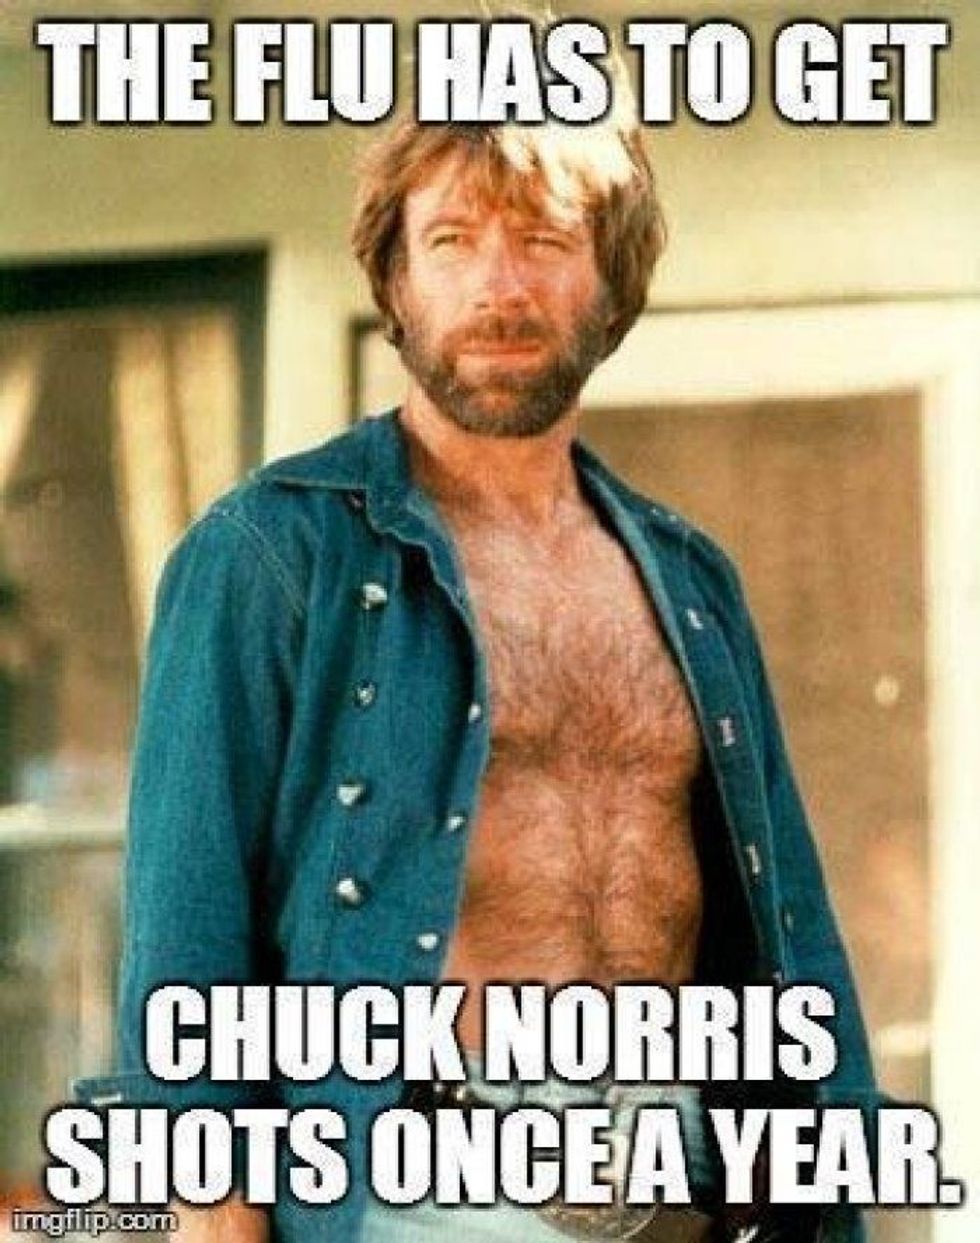 "The flu has to get Chuck Norris shots once a year." 